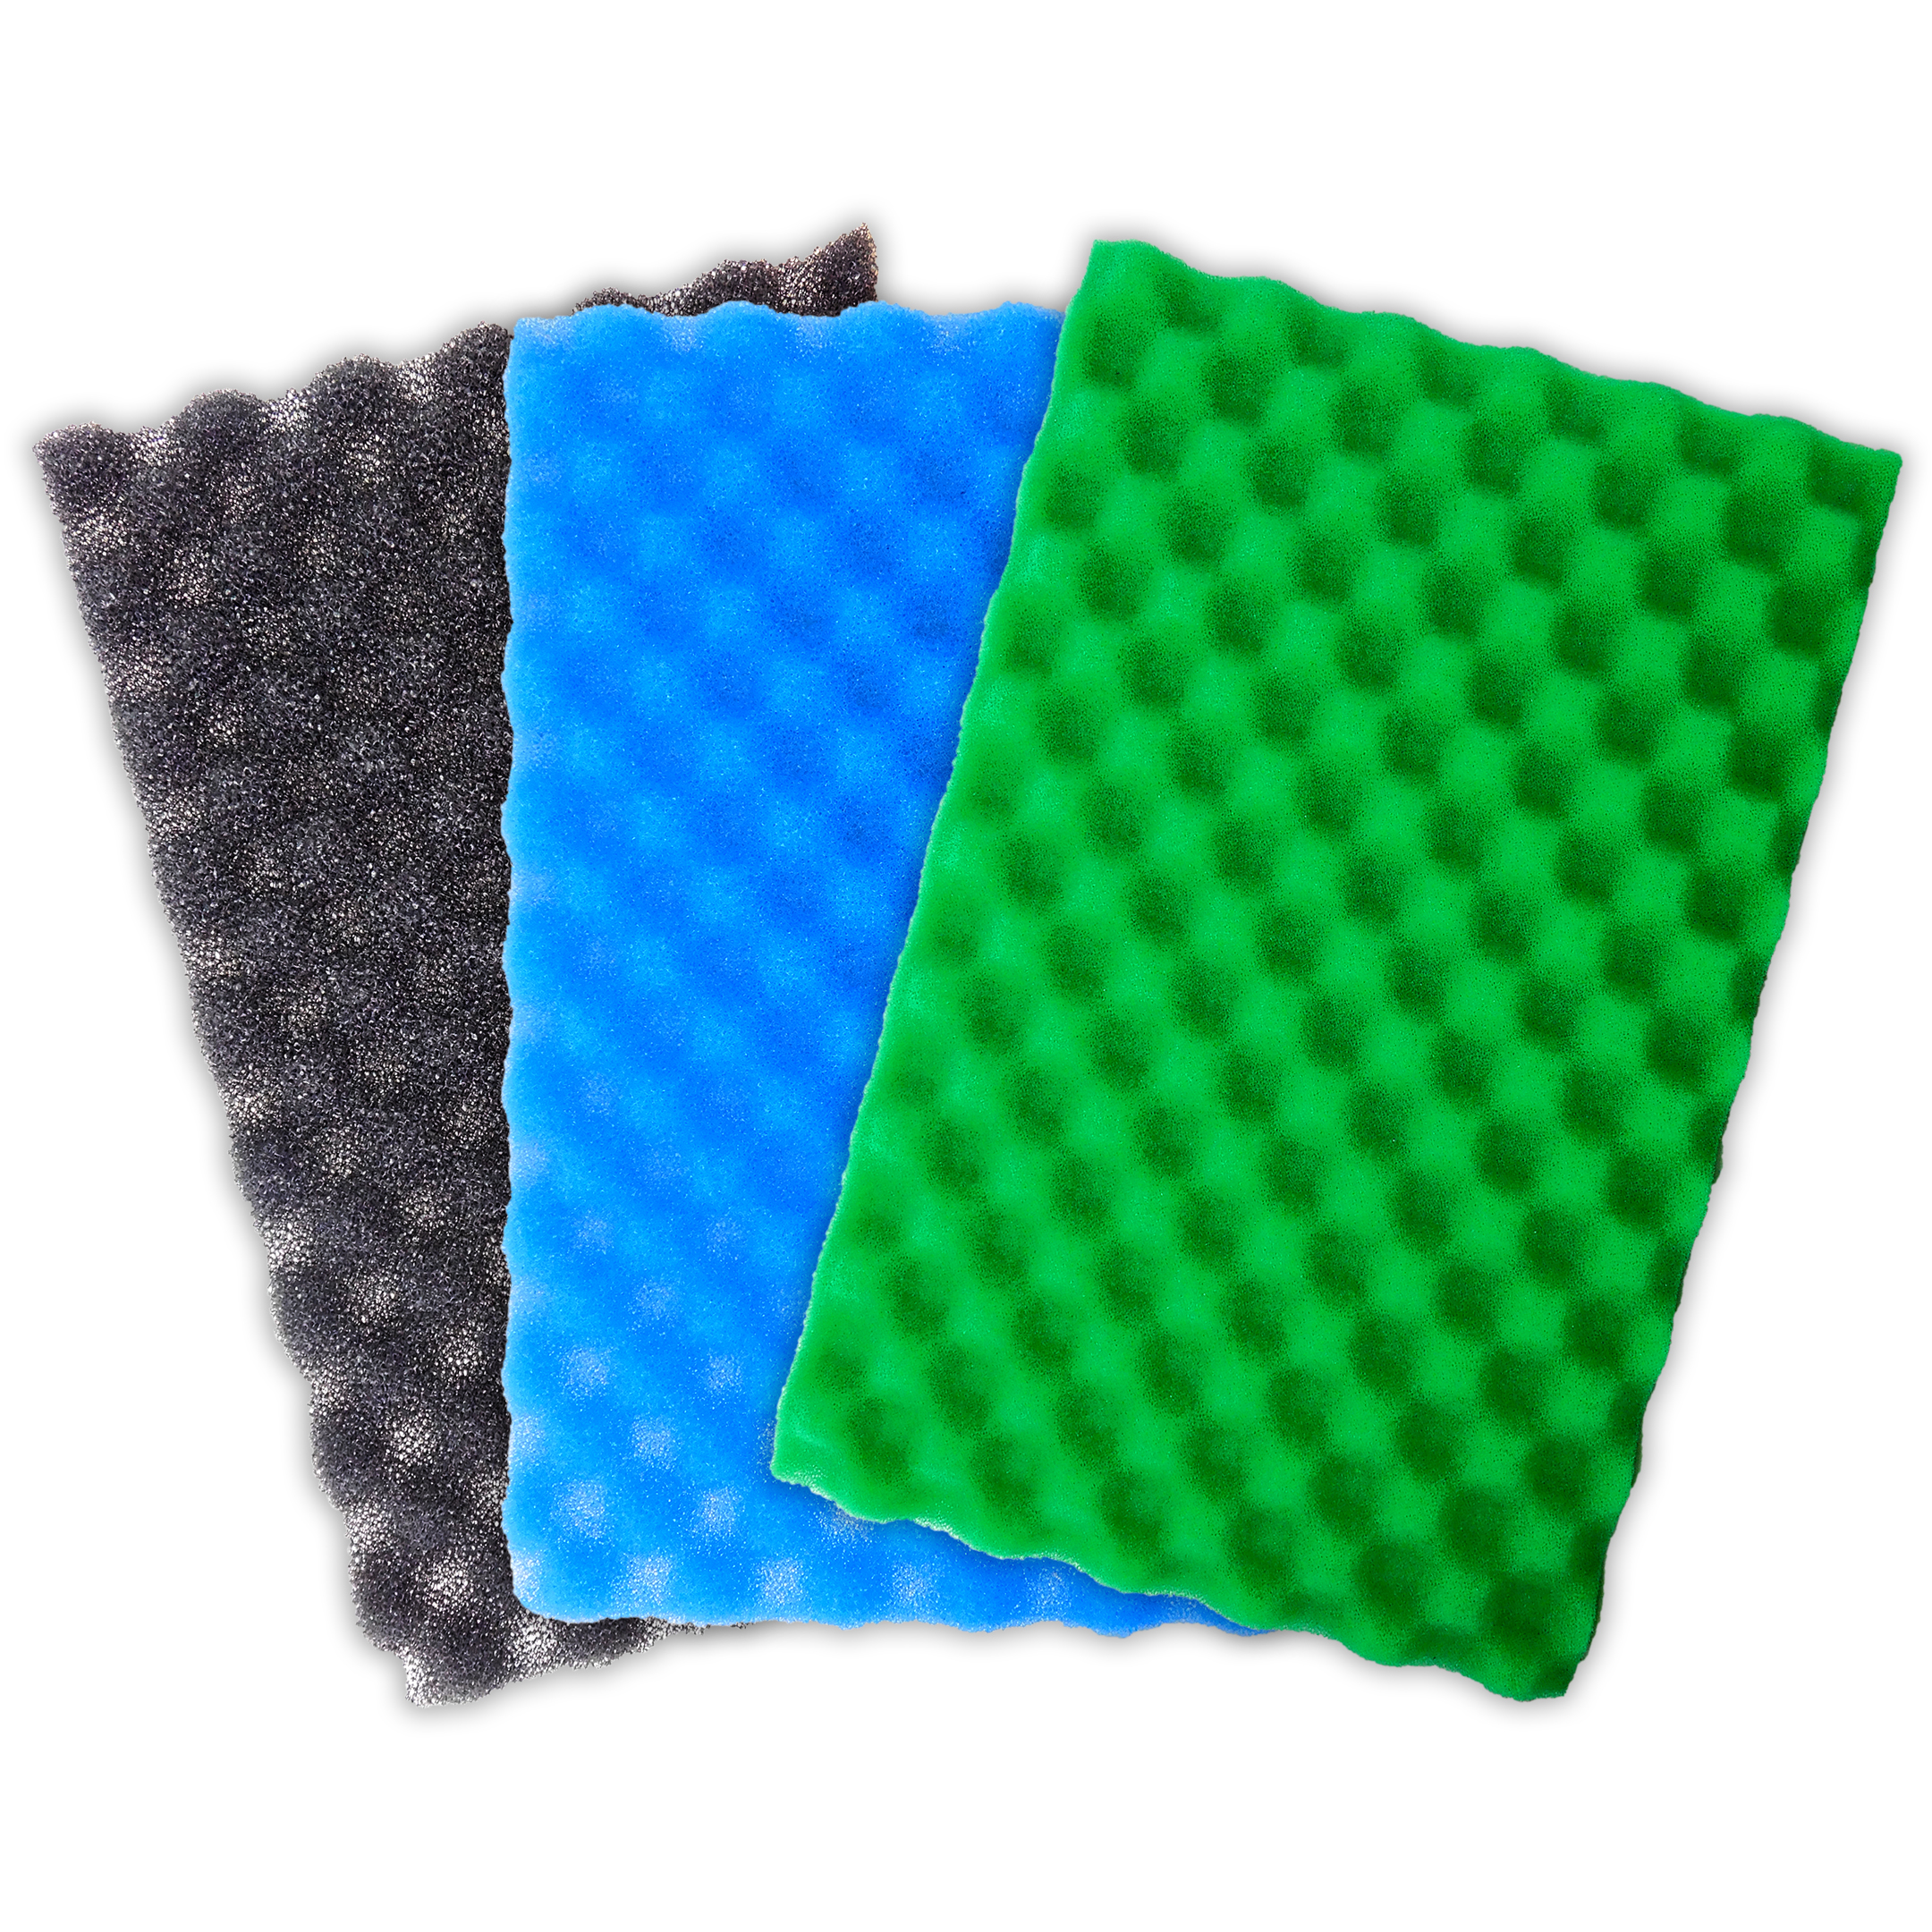 Koi Pond Egg Box Type Foam Pond Filter Replacement Pads x 3 Layers Foam Filter 